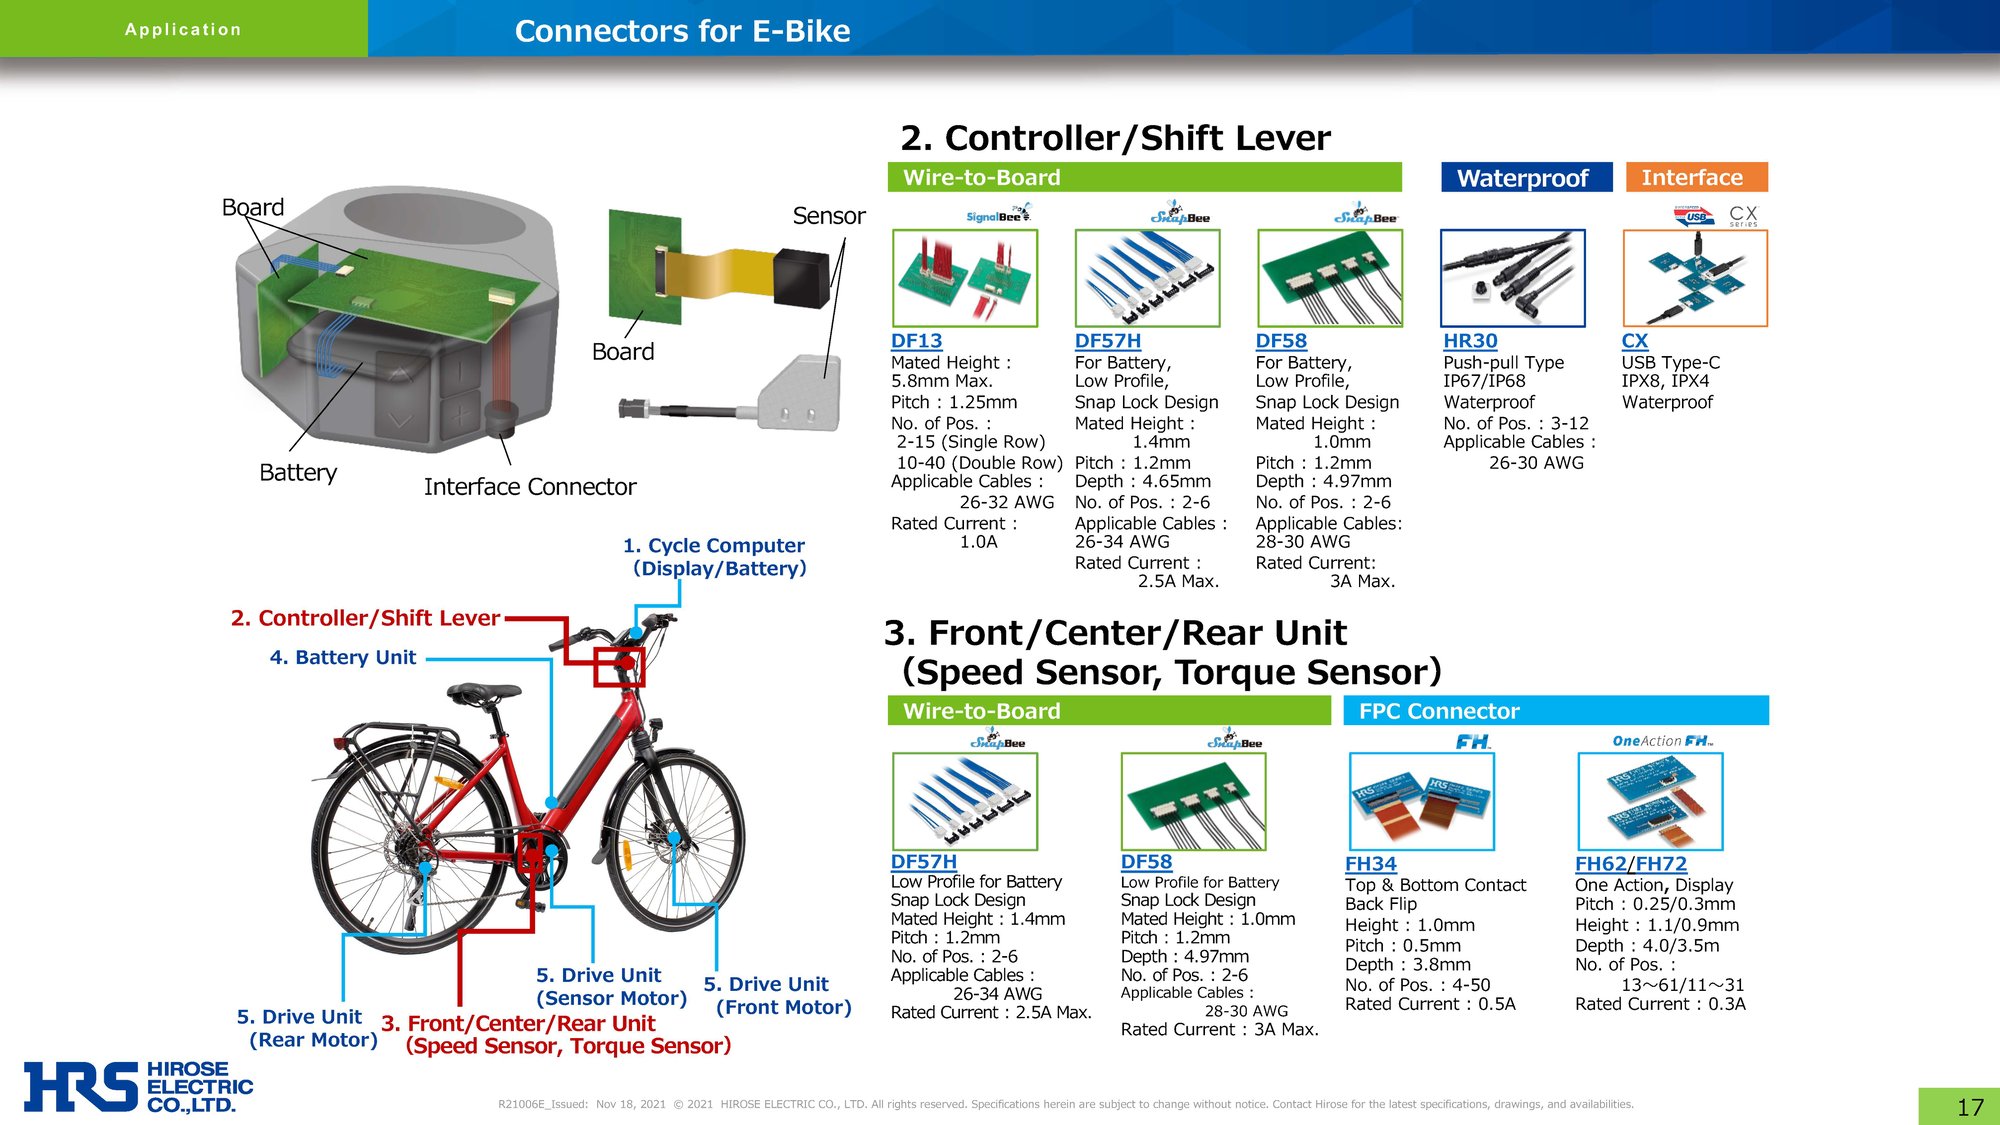 Detailed blueprint highlighting connector positions for e-bike's controller, shift lever, and speed-torque sensors.